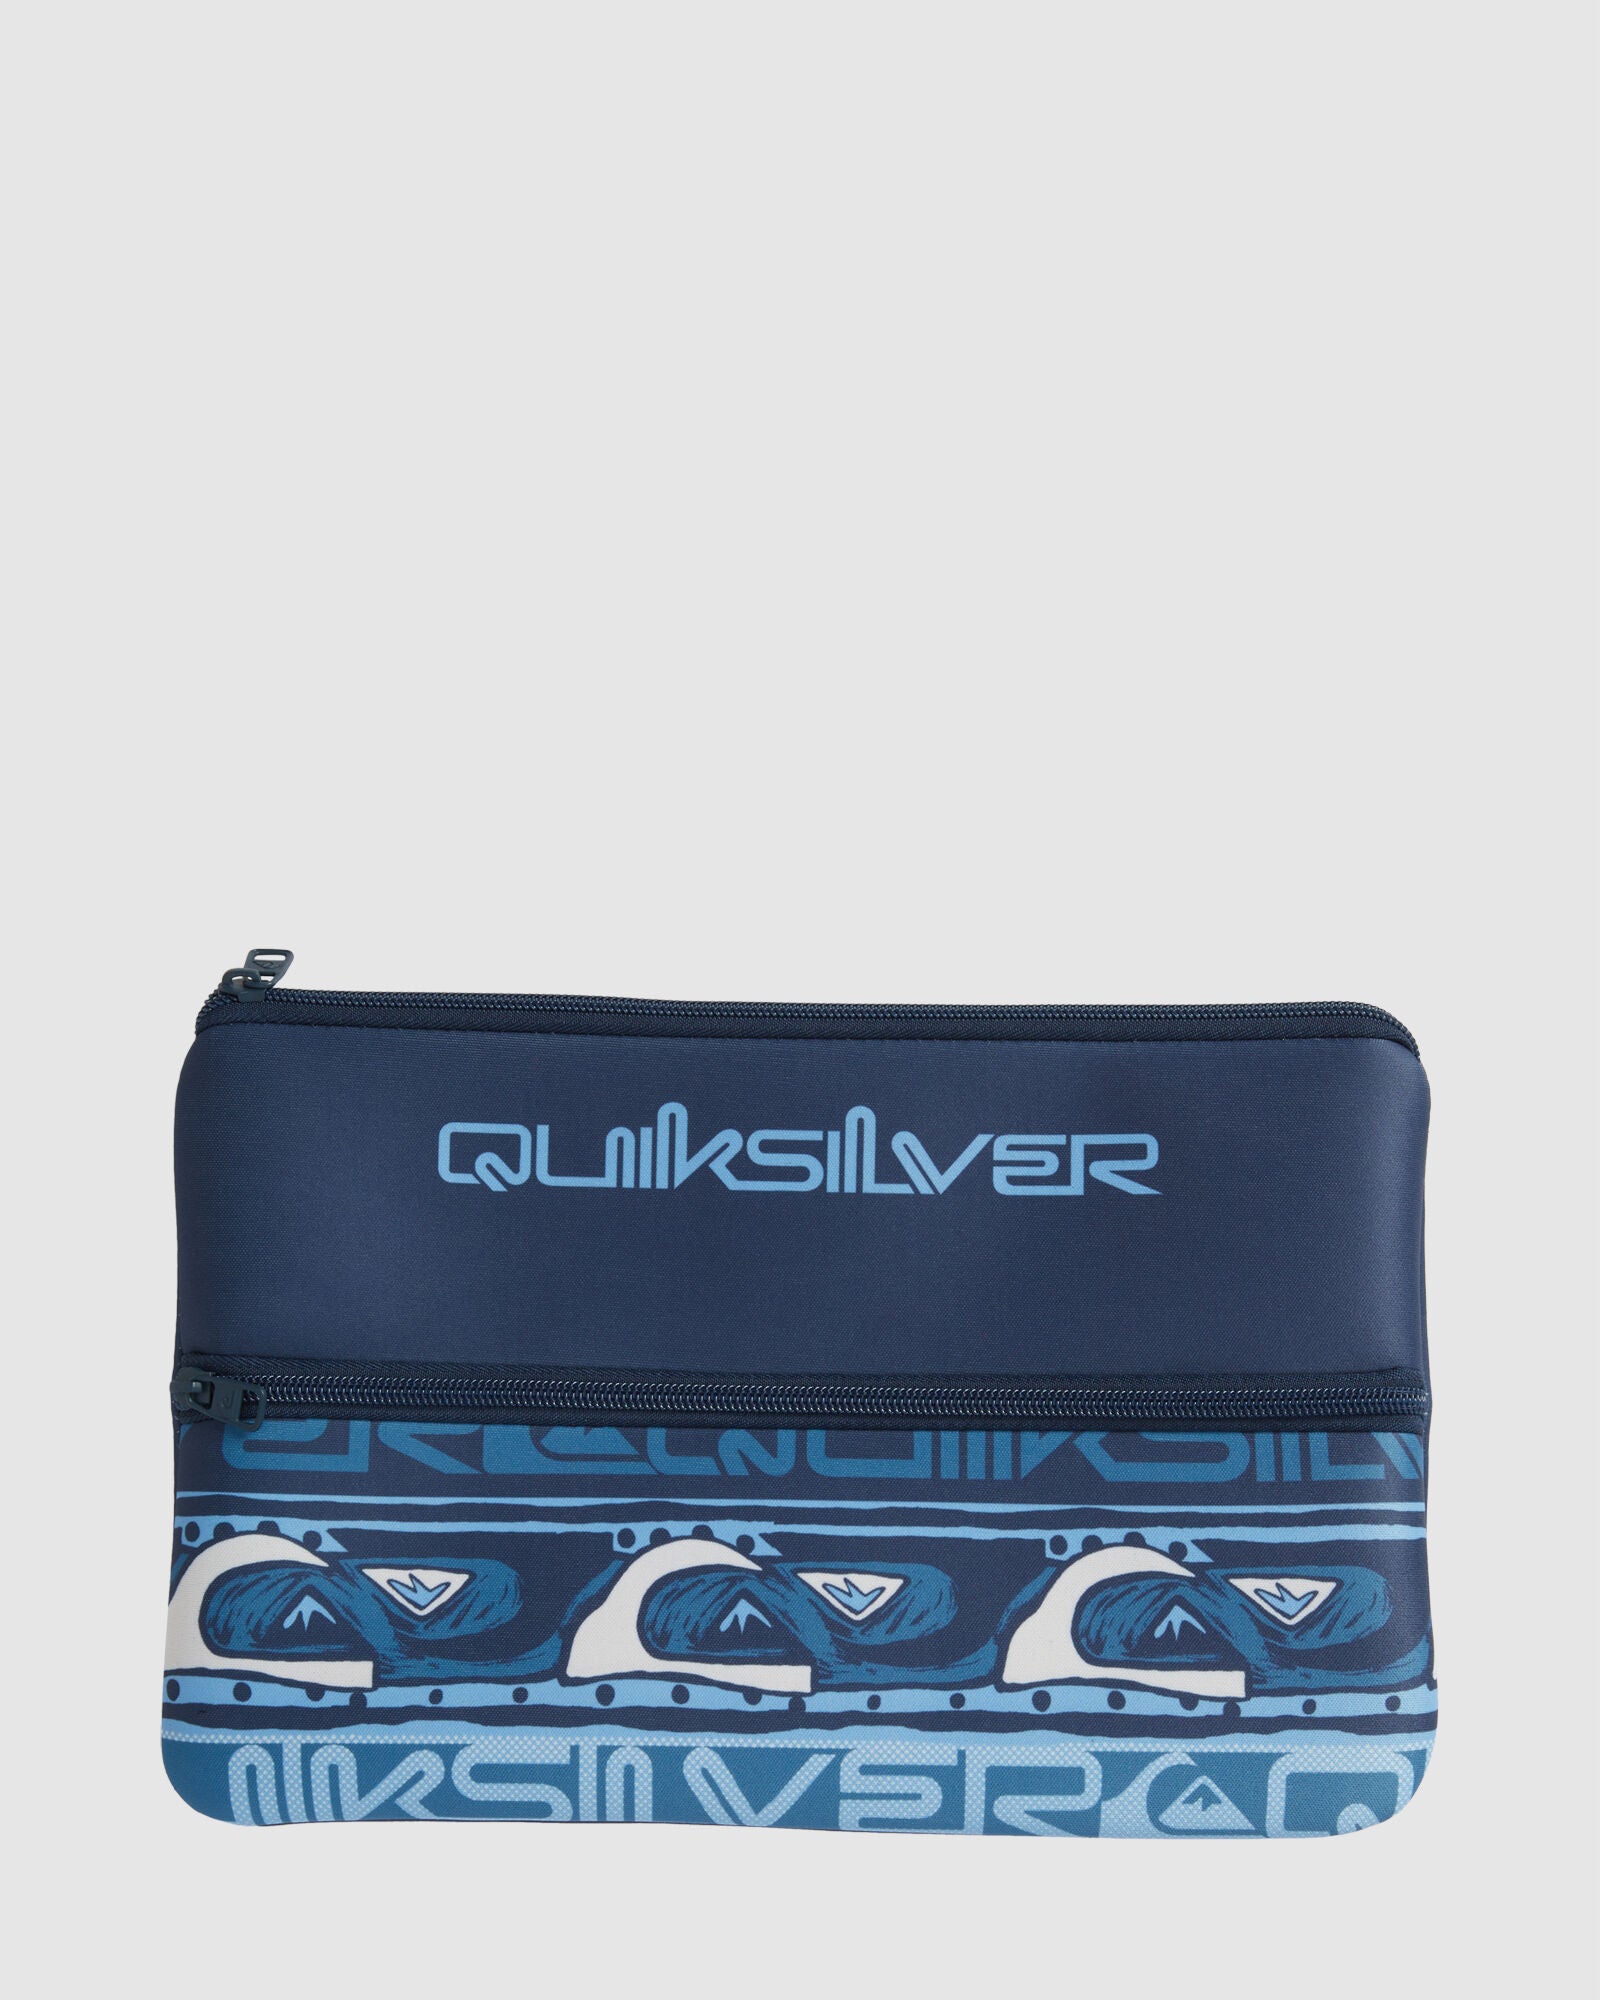 quiksilver blocked jumbo pencil case  boys mens accessories back to school two zip compartment blue